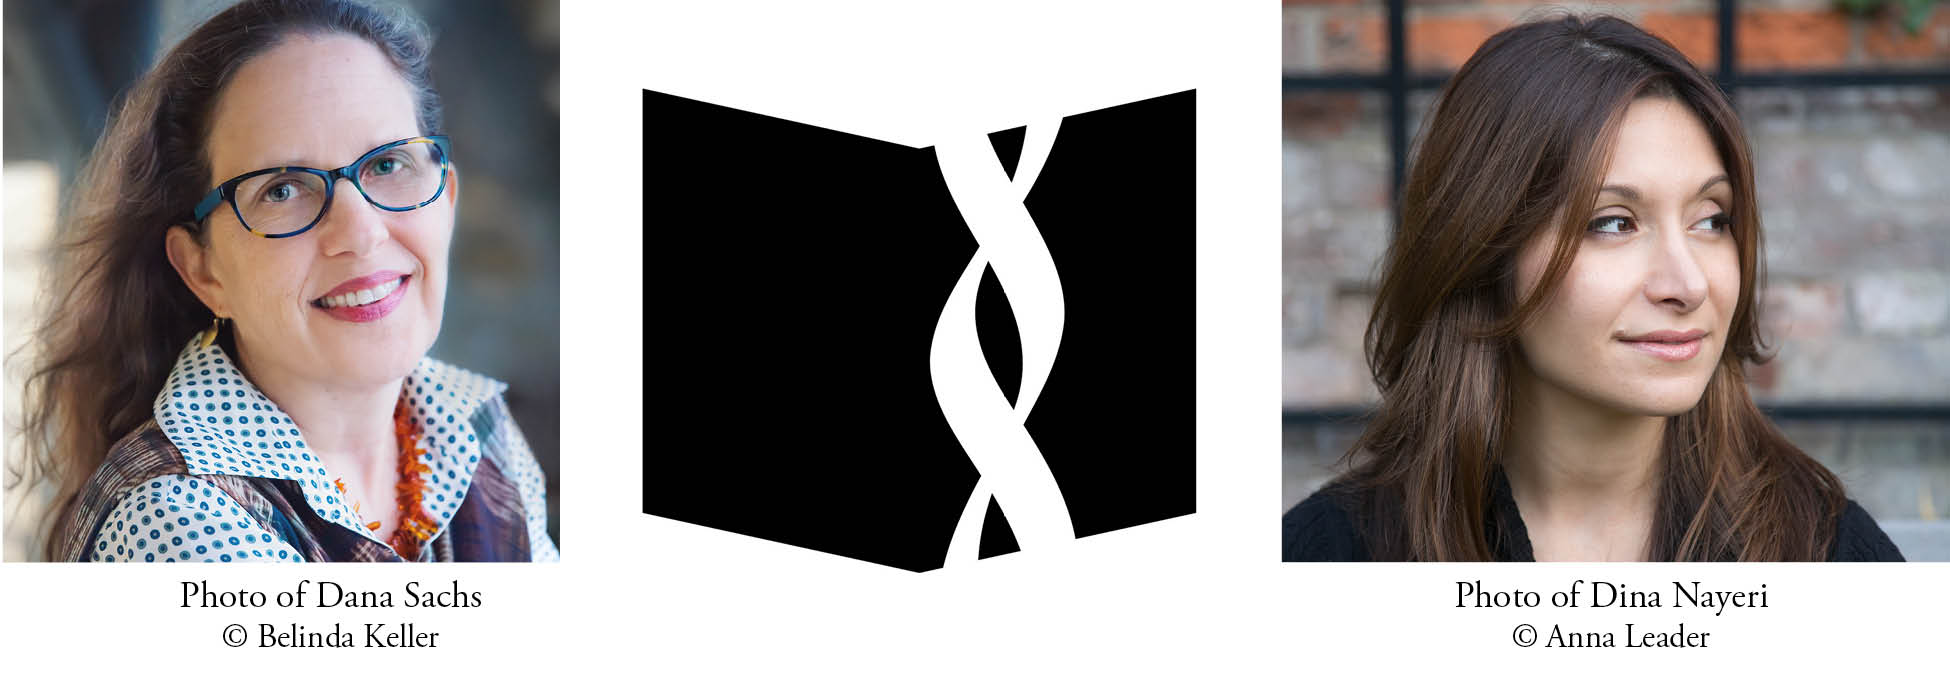 An image with three parts. 1. A photo of Dana Sachs by Belinda Keller. 2. The BLP logo, a black outline of a book with a DNA strand down the spine. 3. A photo of Dina Nayeri by Anna Leader.